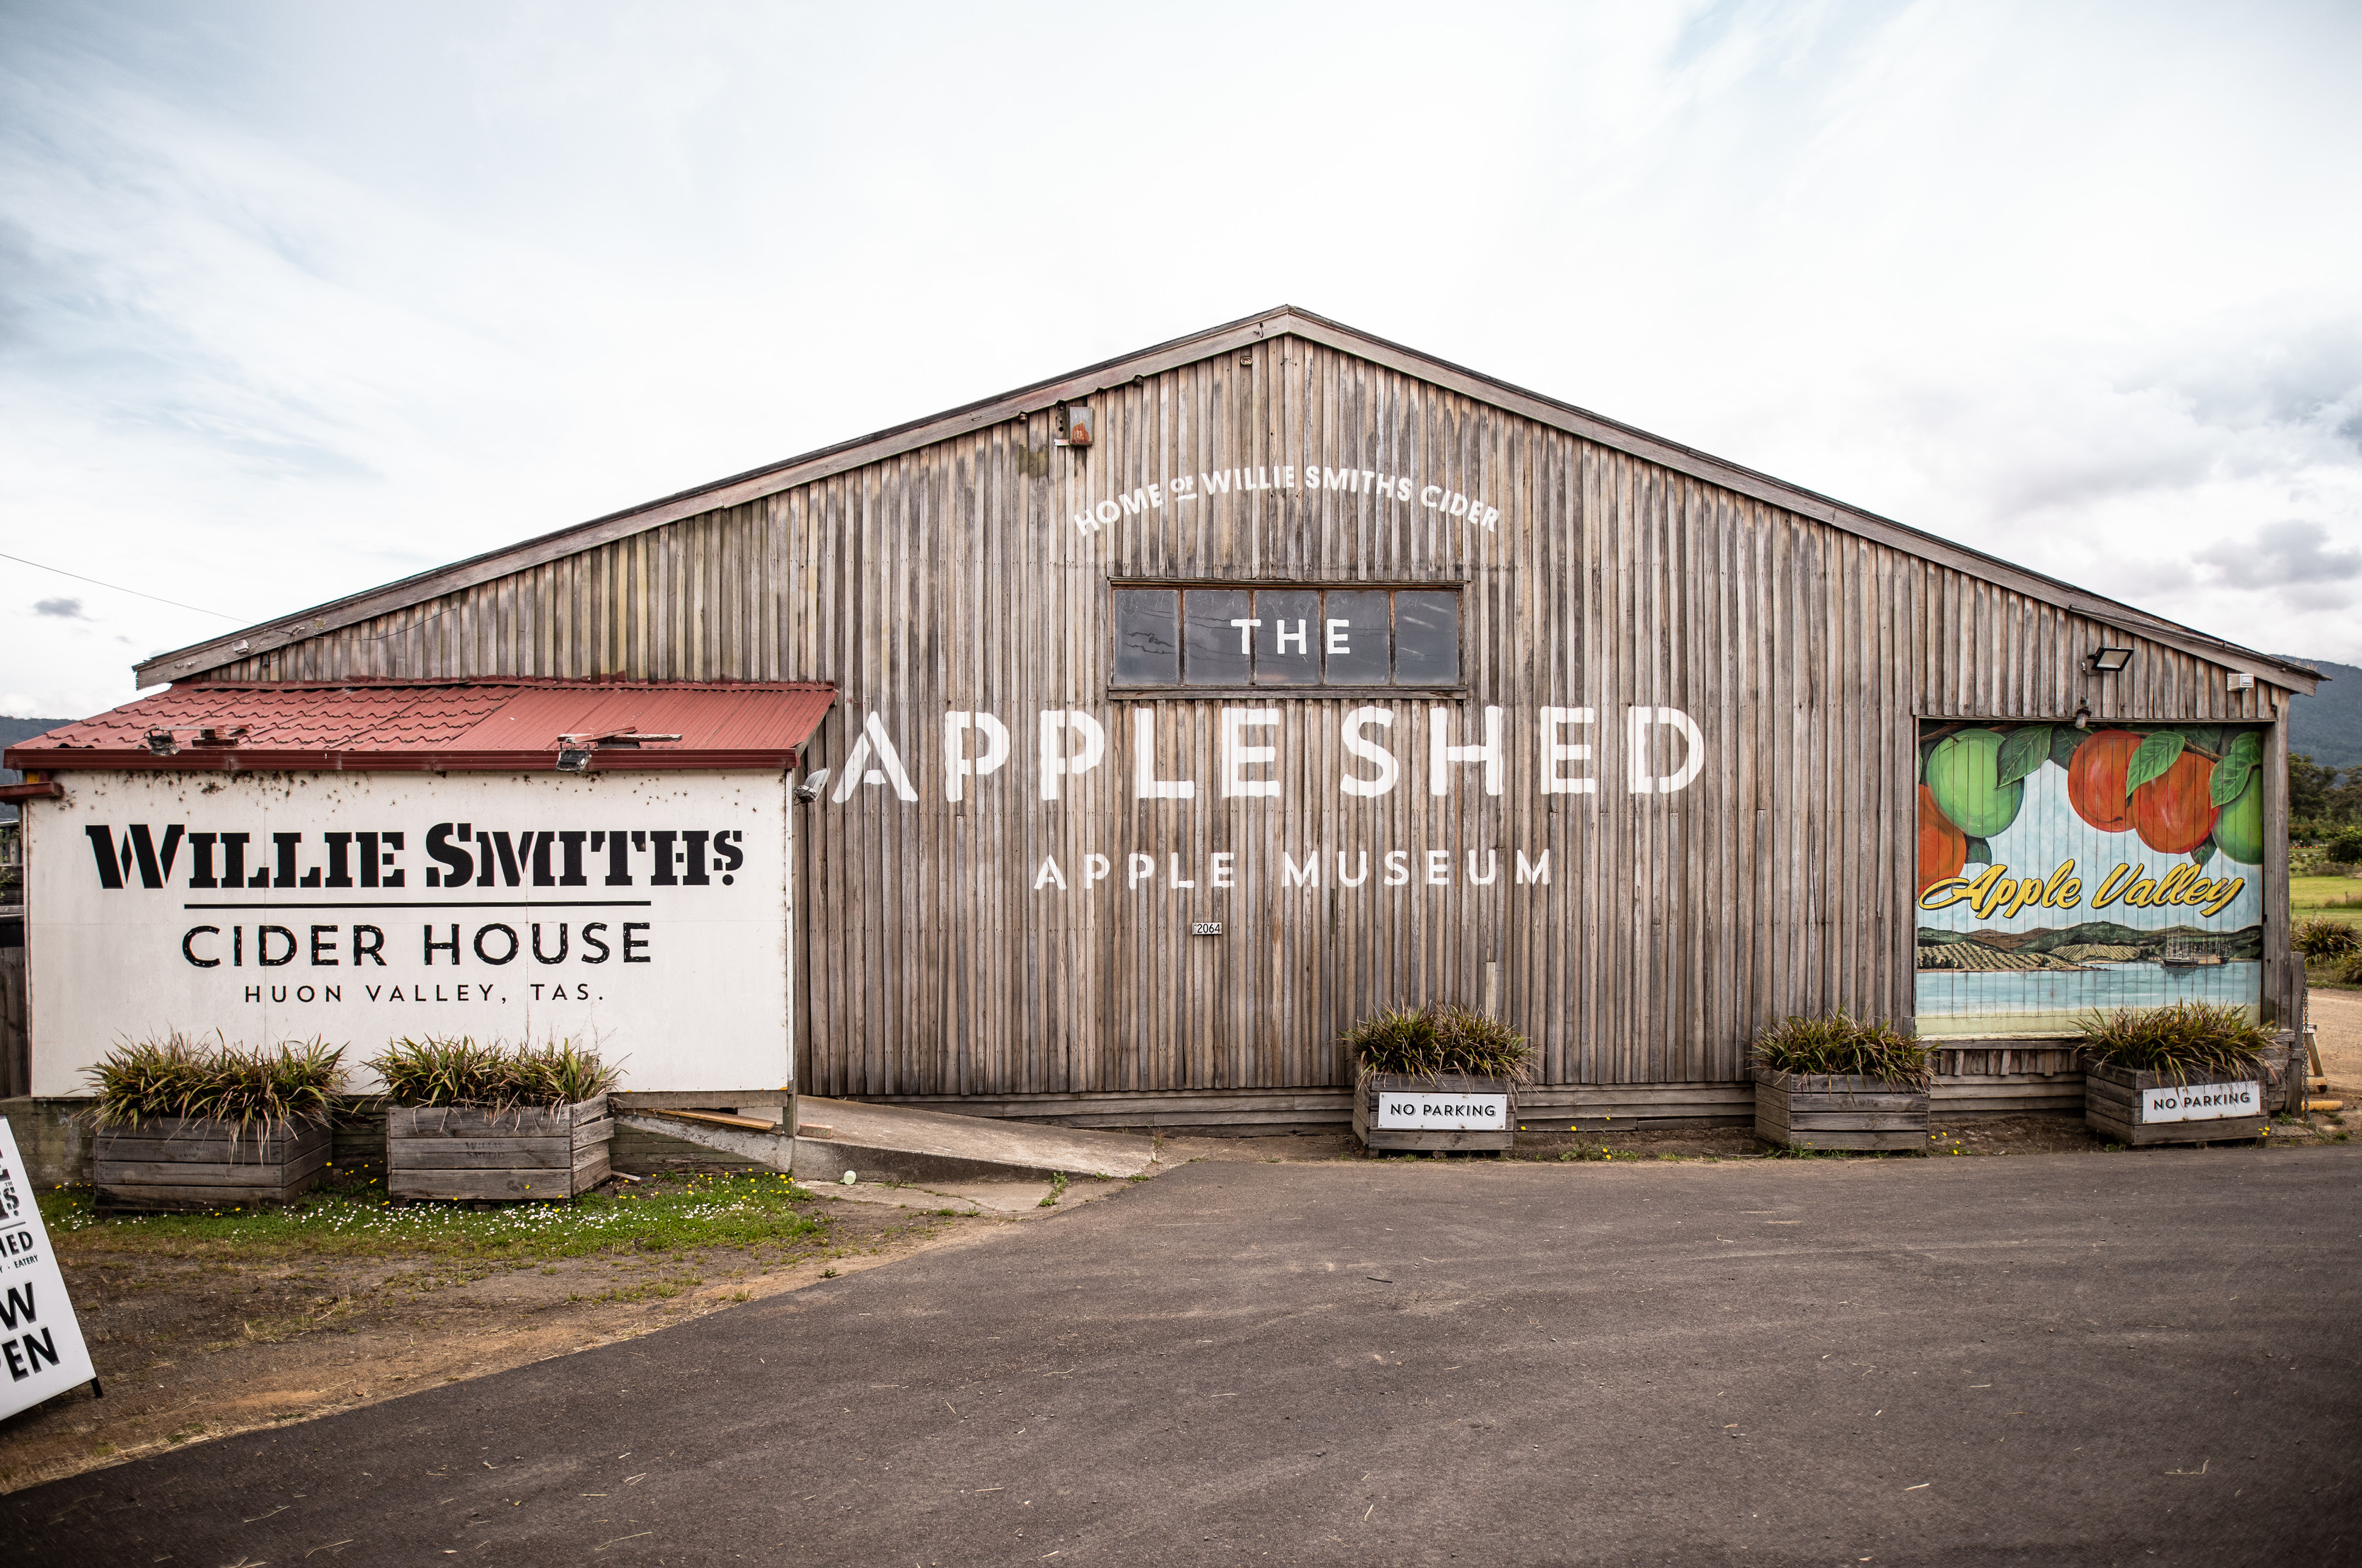 Willie Smith's Apple Shed